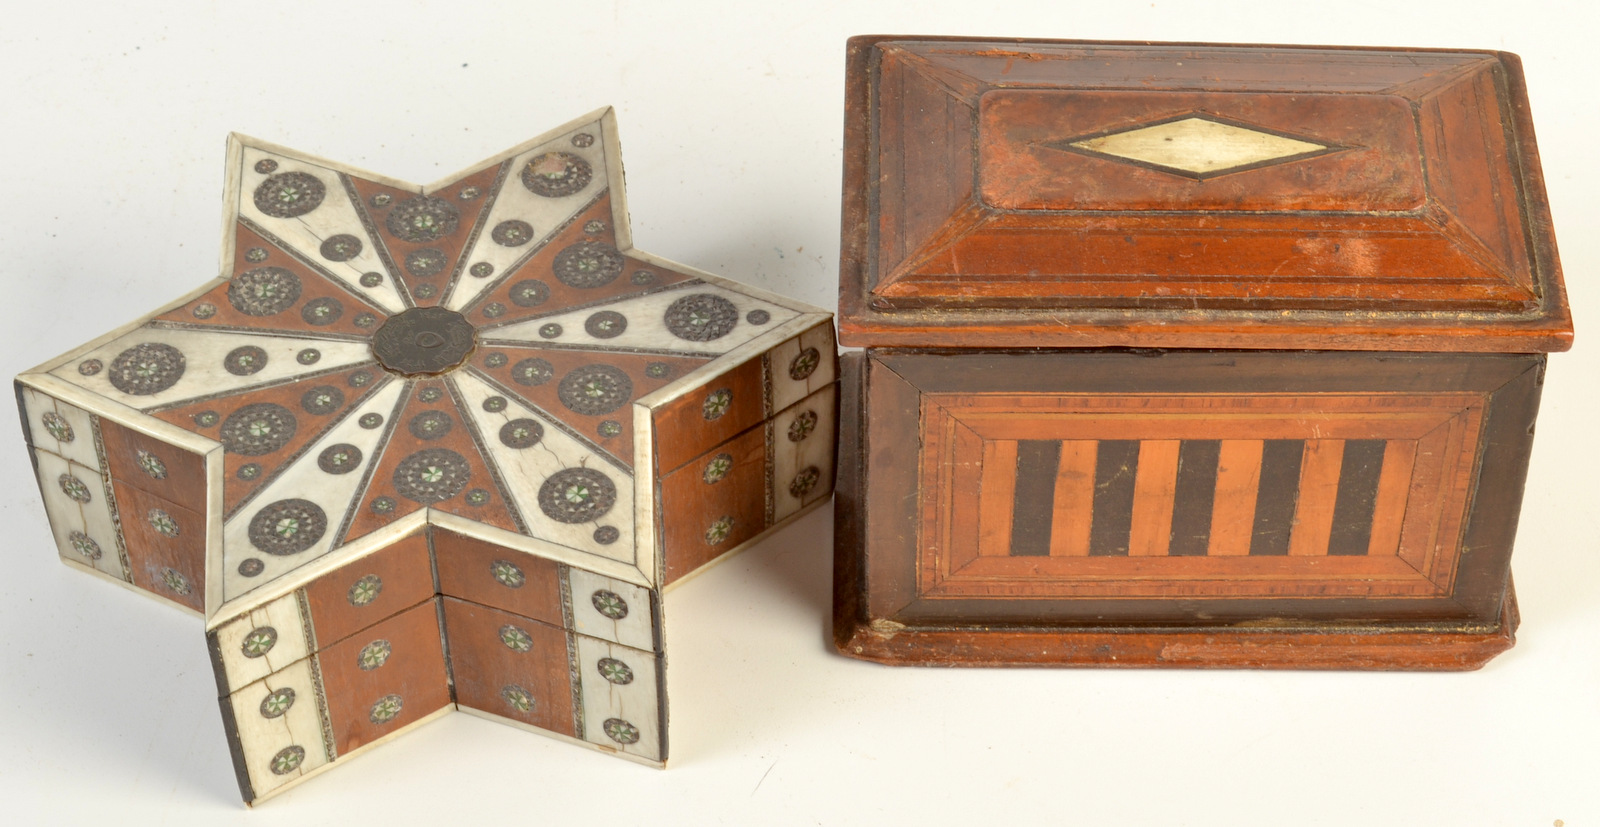 A Vizagapatam star shaped box, 17cm, together with one other box.